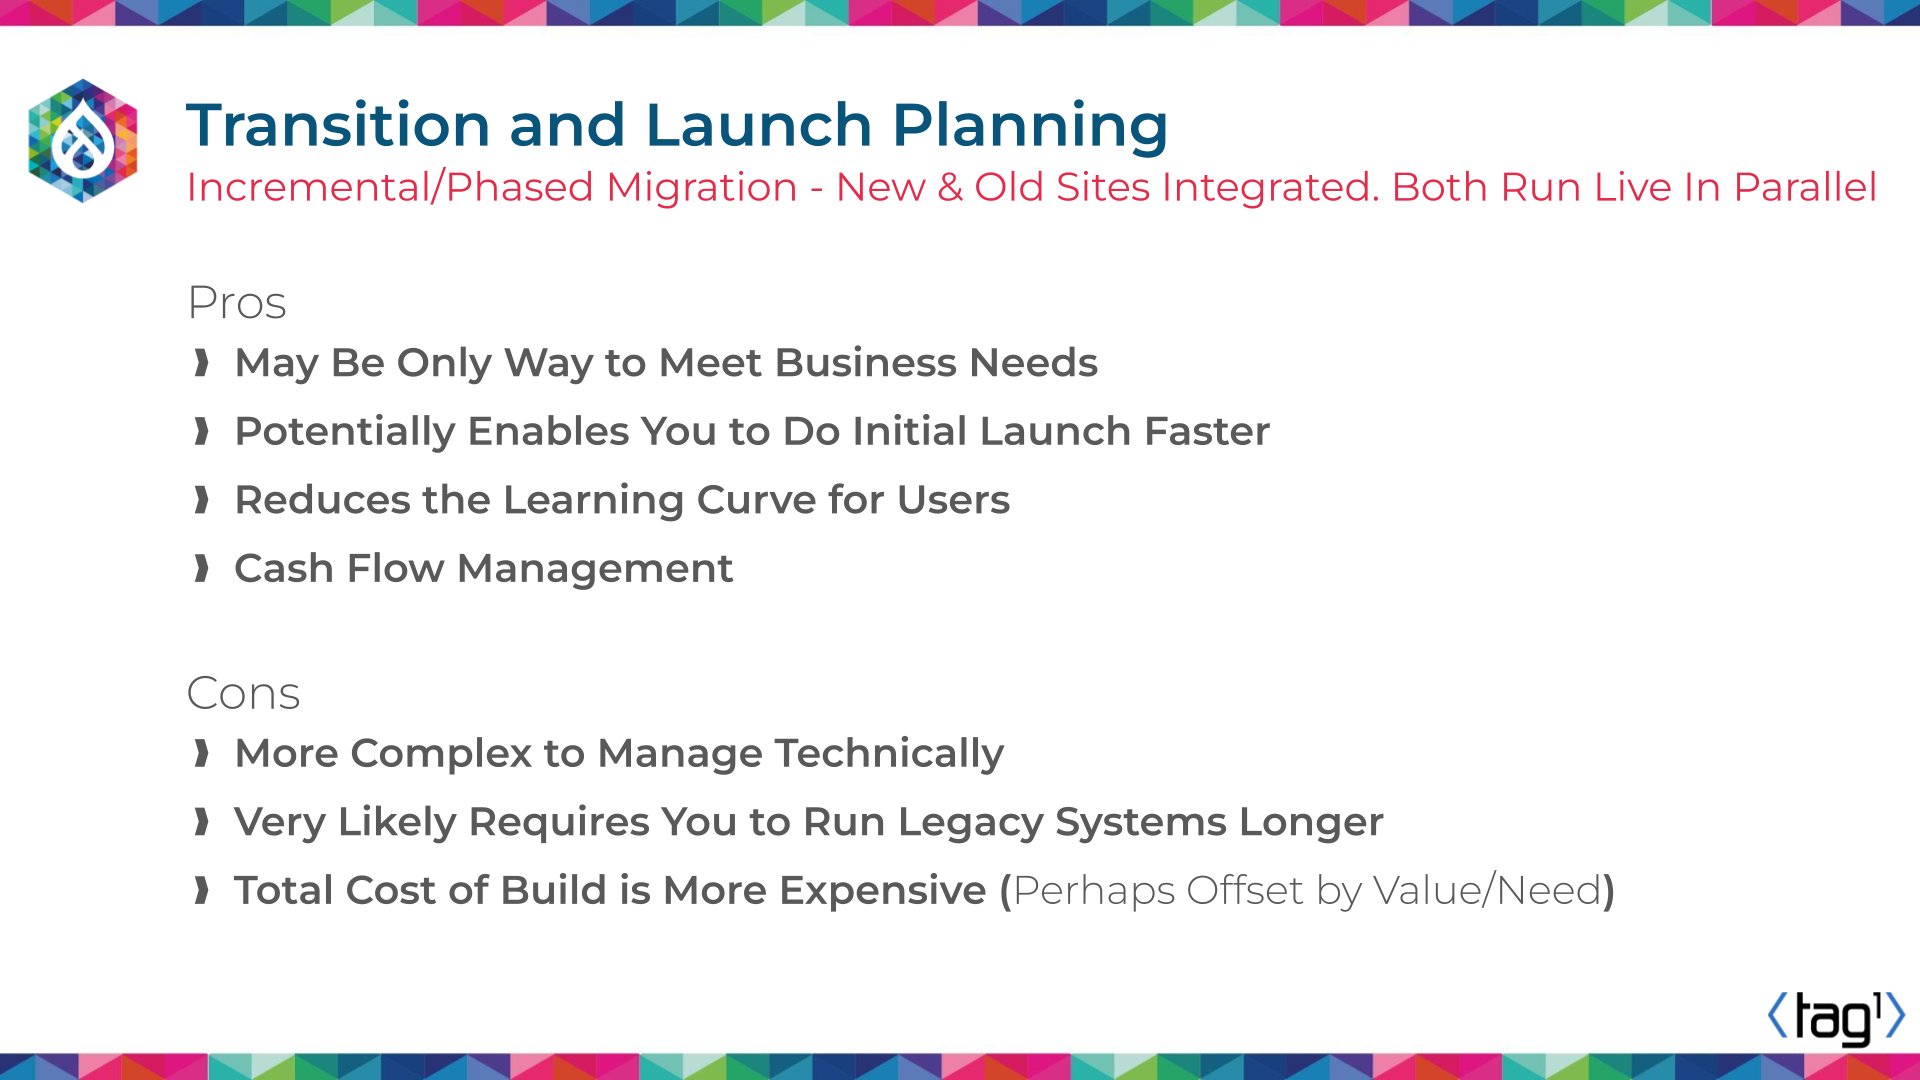 Slides from Mauricio’s “Successful Migrations” presentation highlight the pros and cons of two common approaches to site transitions and launch planning.